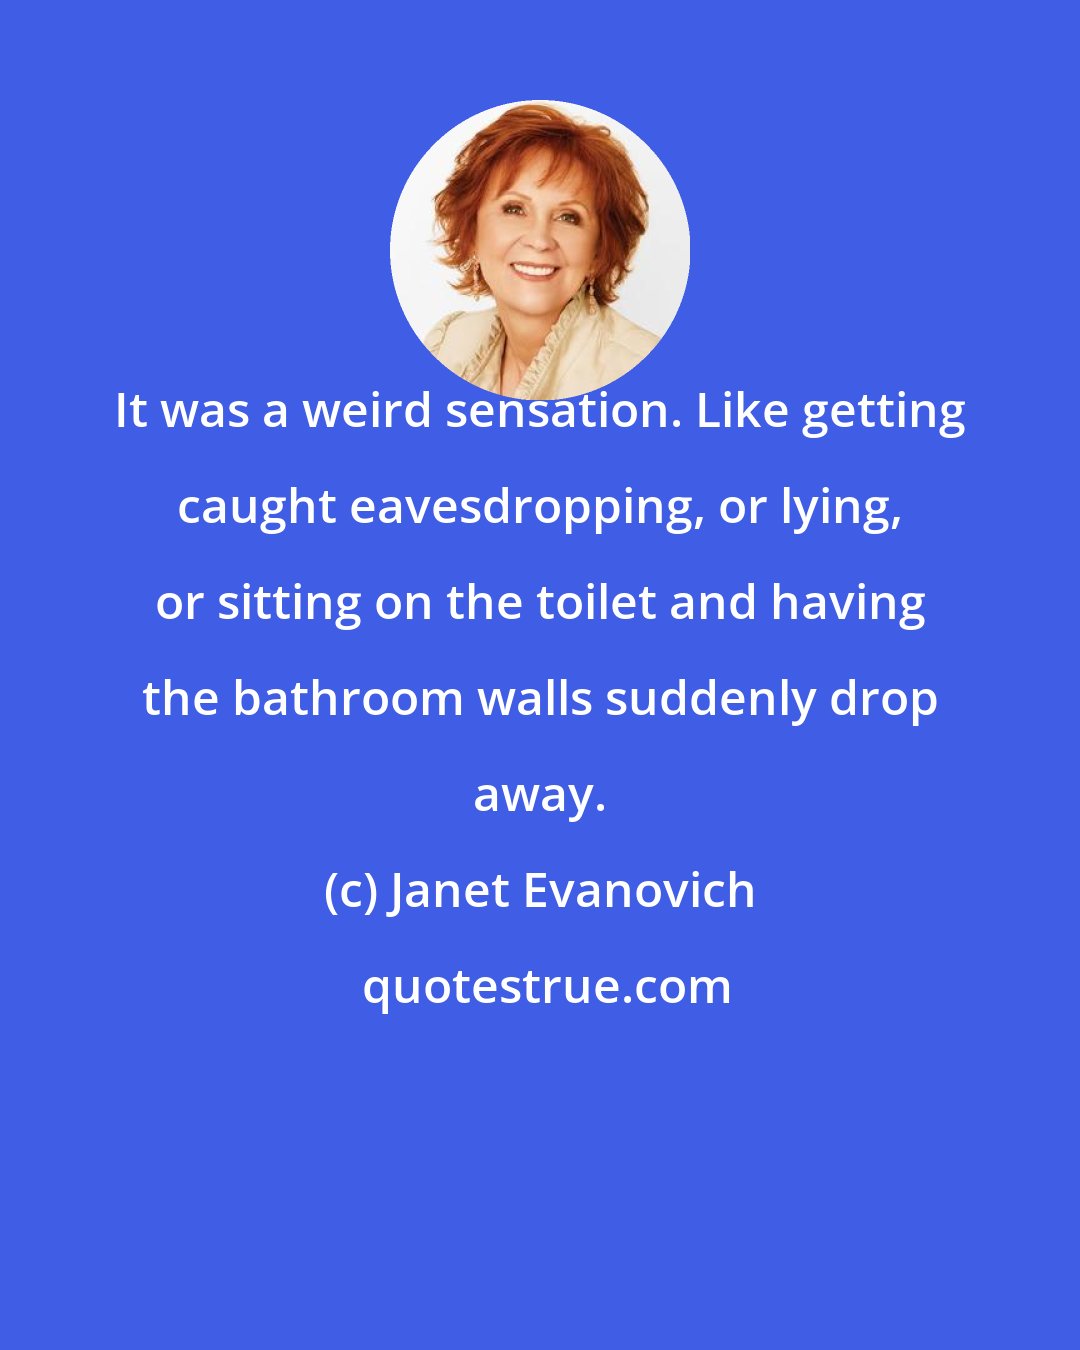 Janet Evanovich: It was a weird sensation. Like getting caught eavesdropping, or lying, or sitting on the toilet and having the bathroom walls suddenly drop away.